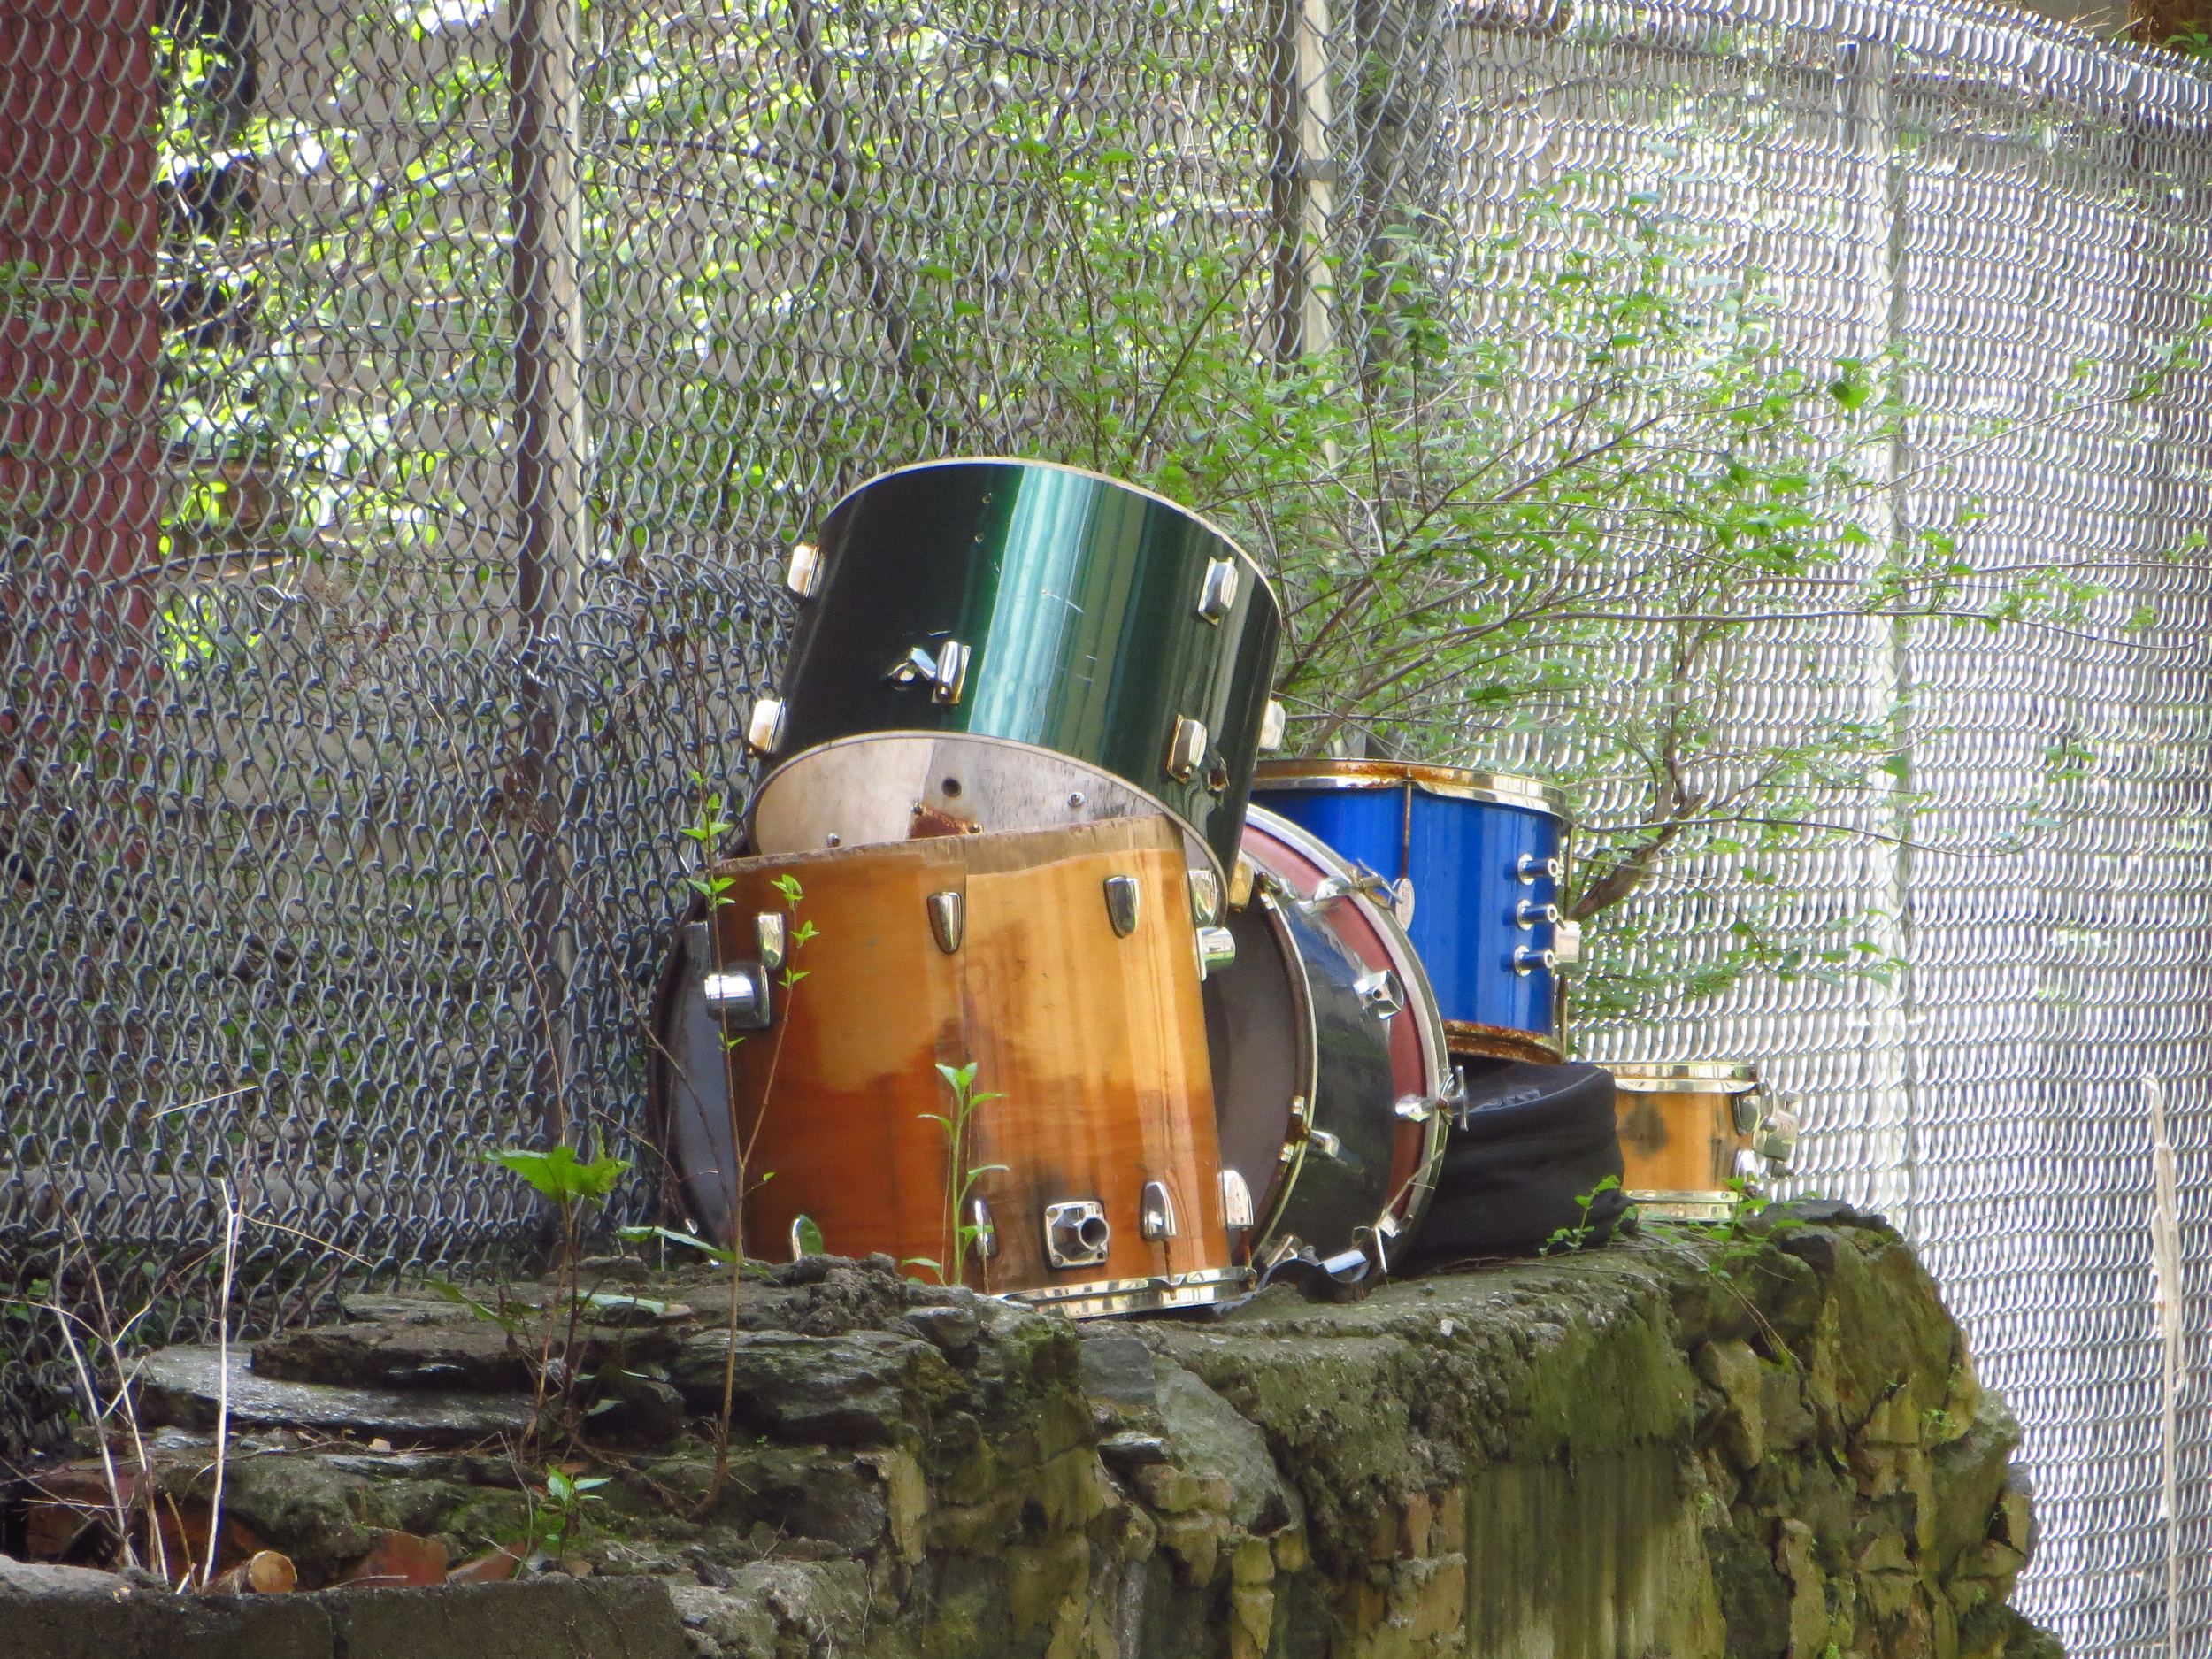 Abandoned drums